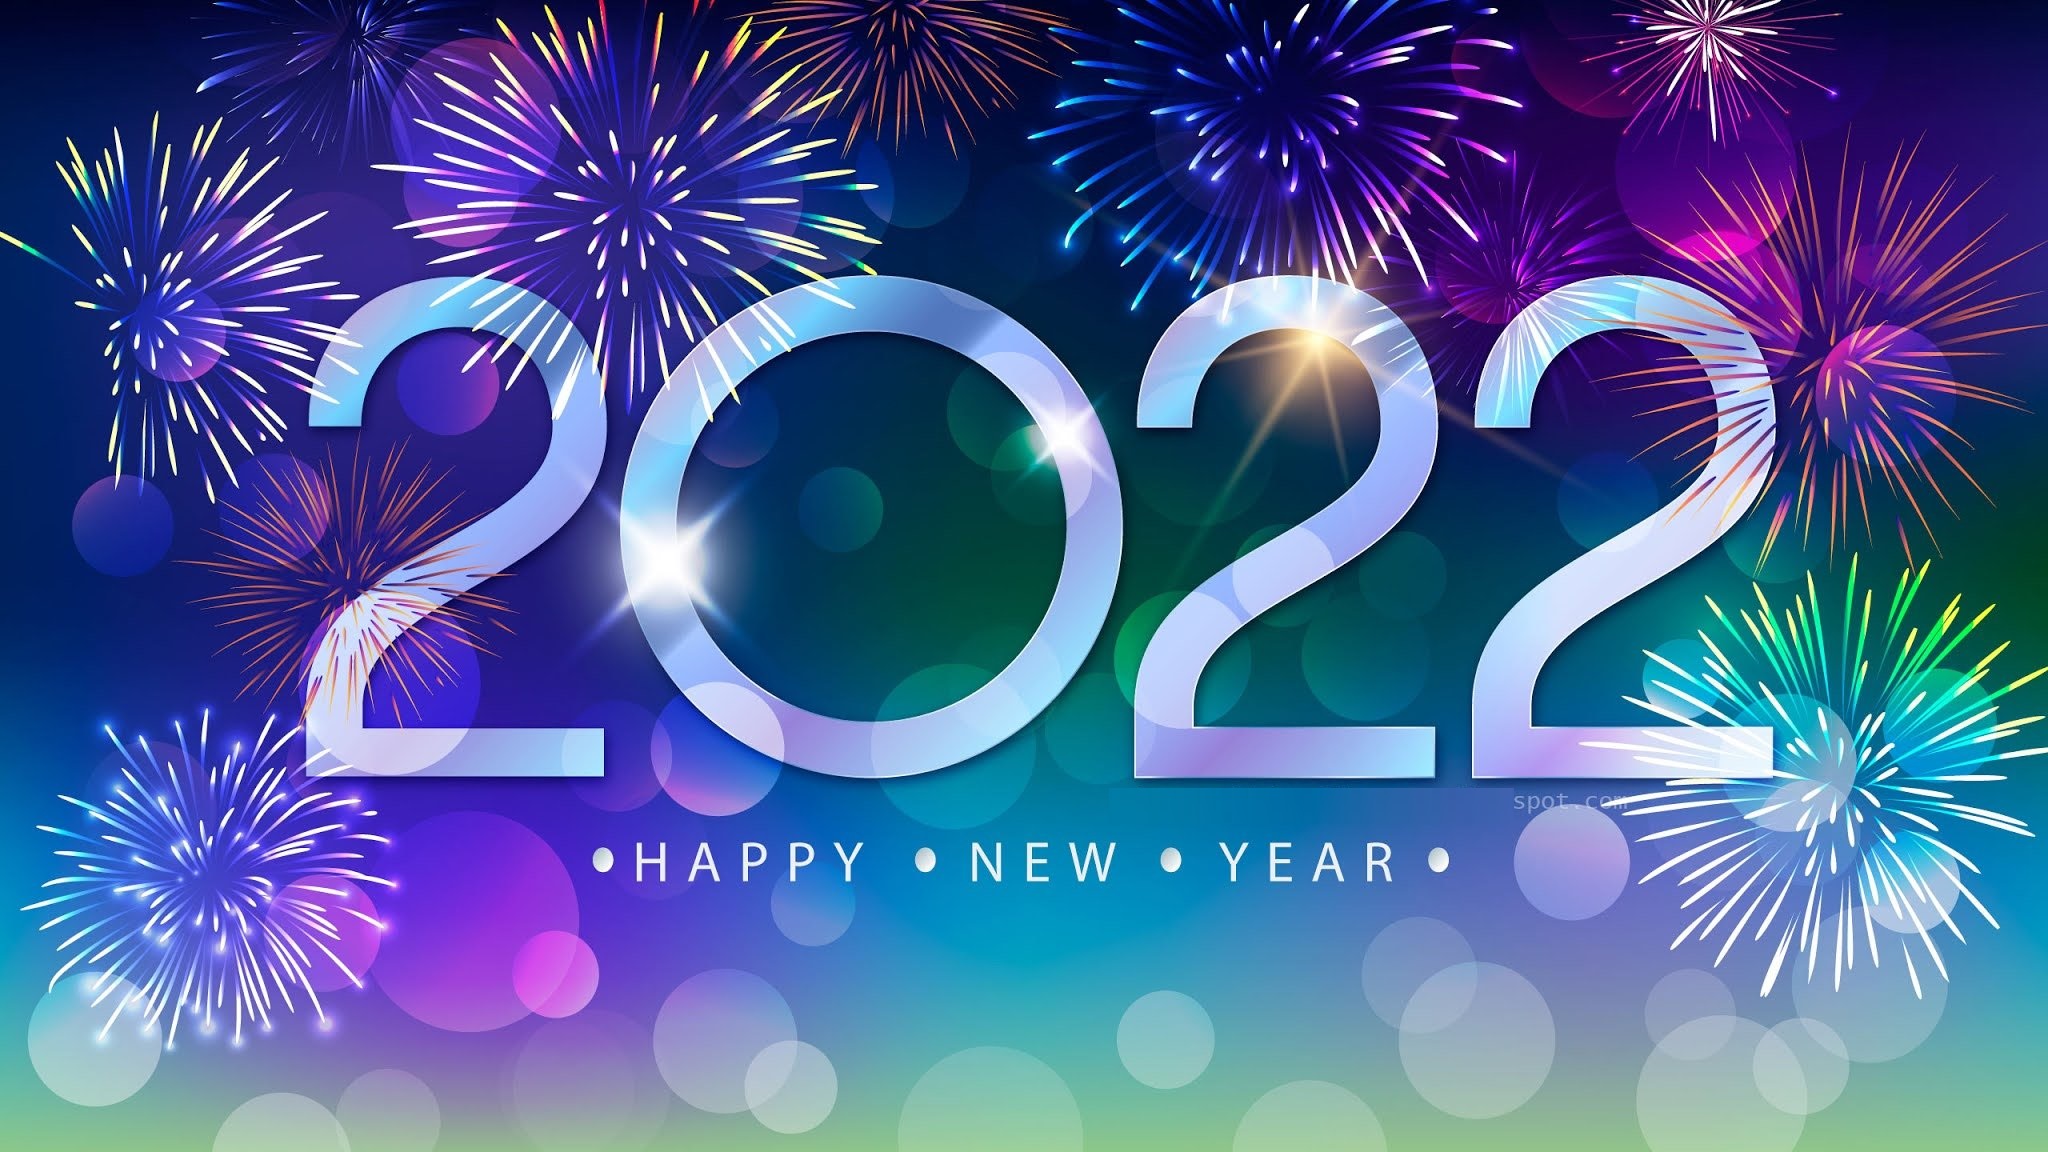 Happy New Year HD Wallpapers, Images (Free Download)